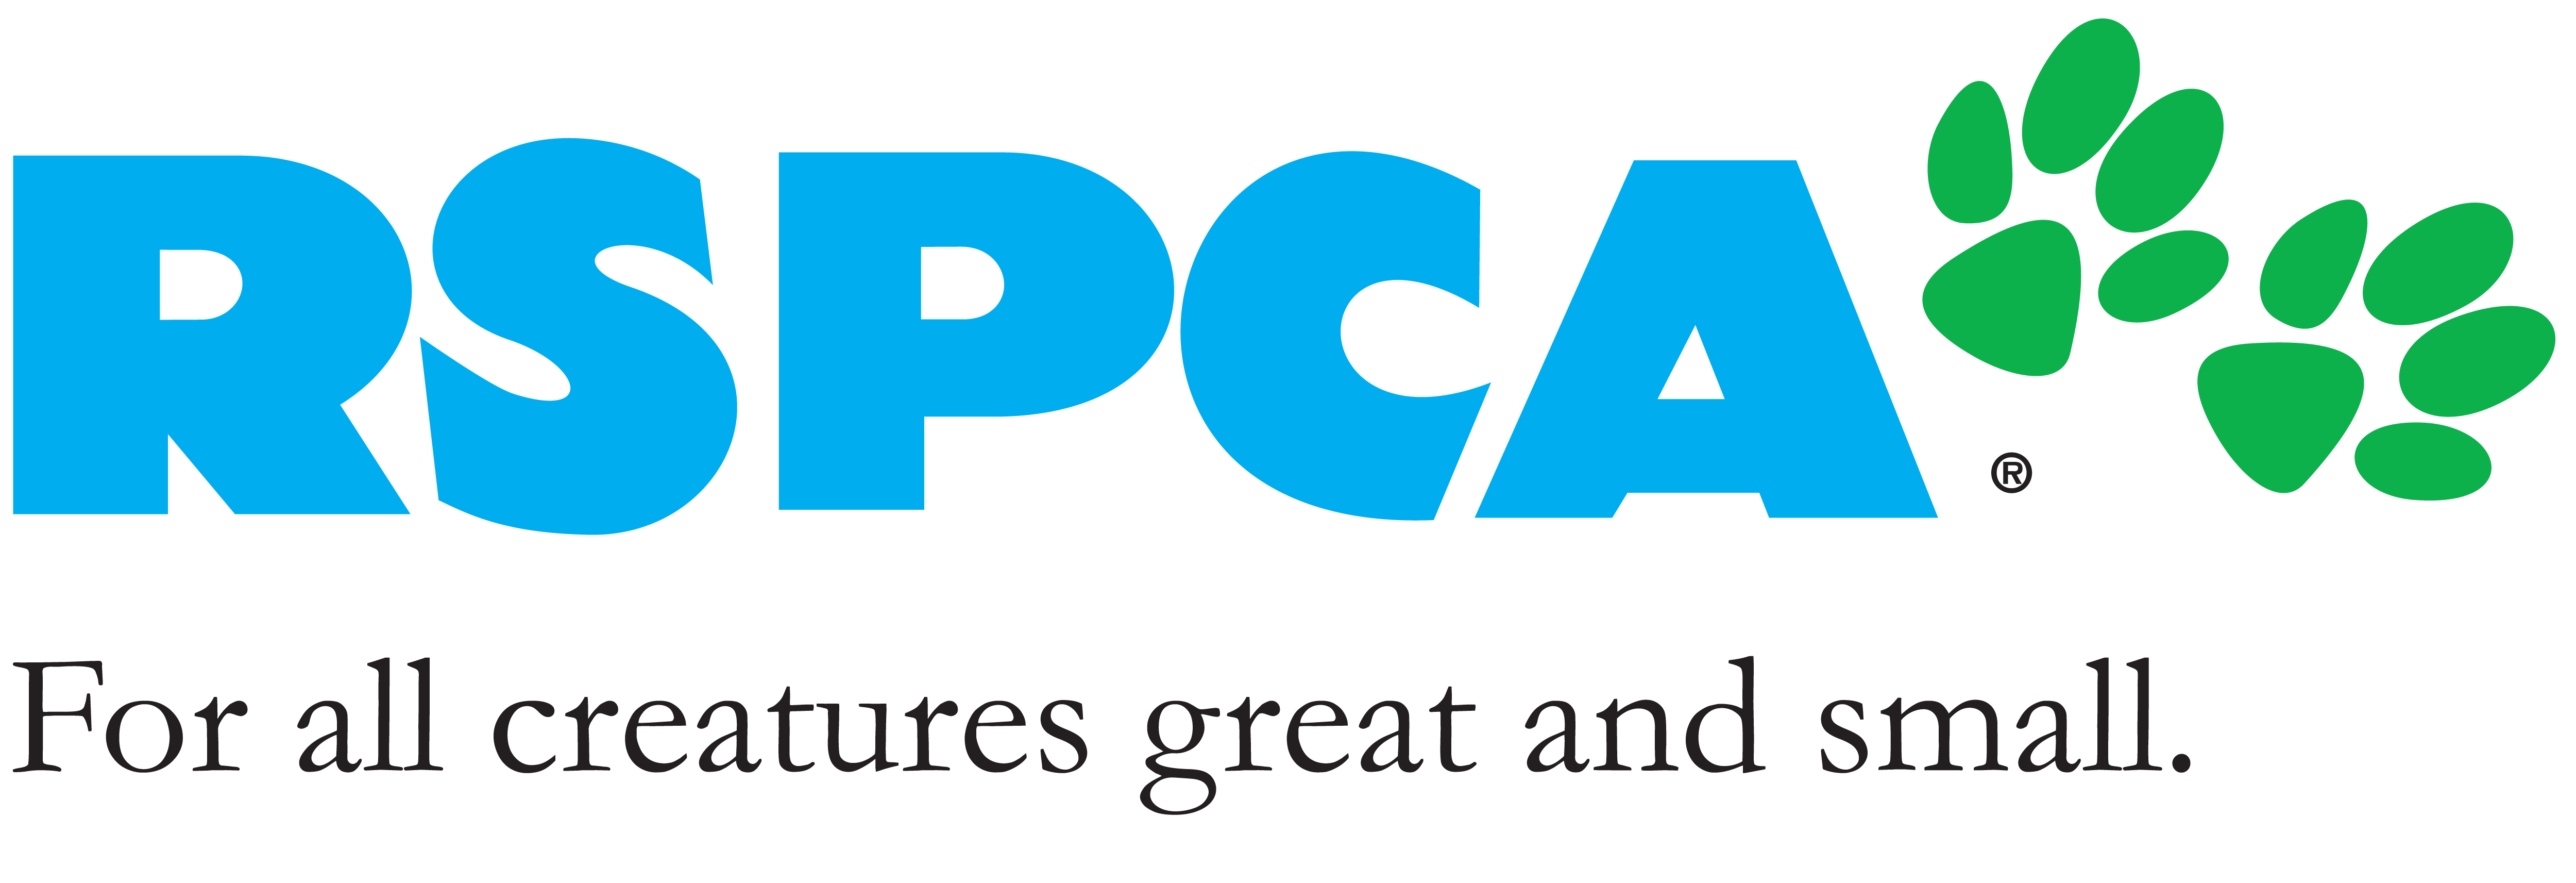 Rspca   Fire Detection For All Creatures Great And Small   Torvac Pluspng.com  - Rspca, Transparent background PNG HD thumbnail